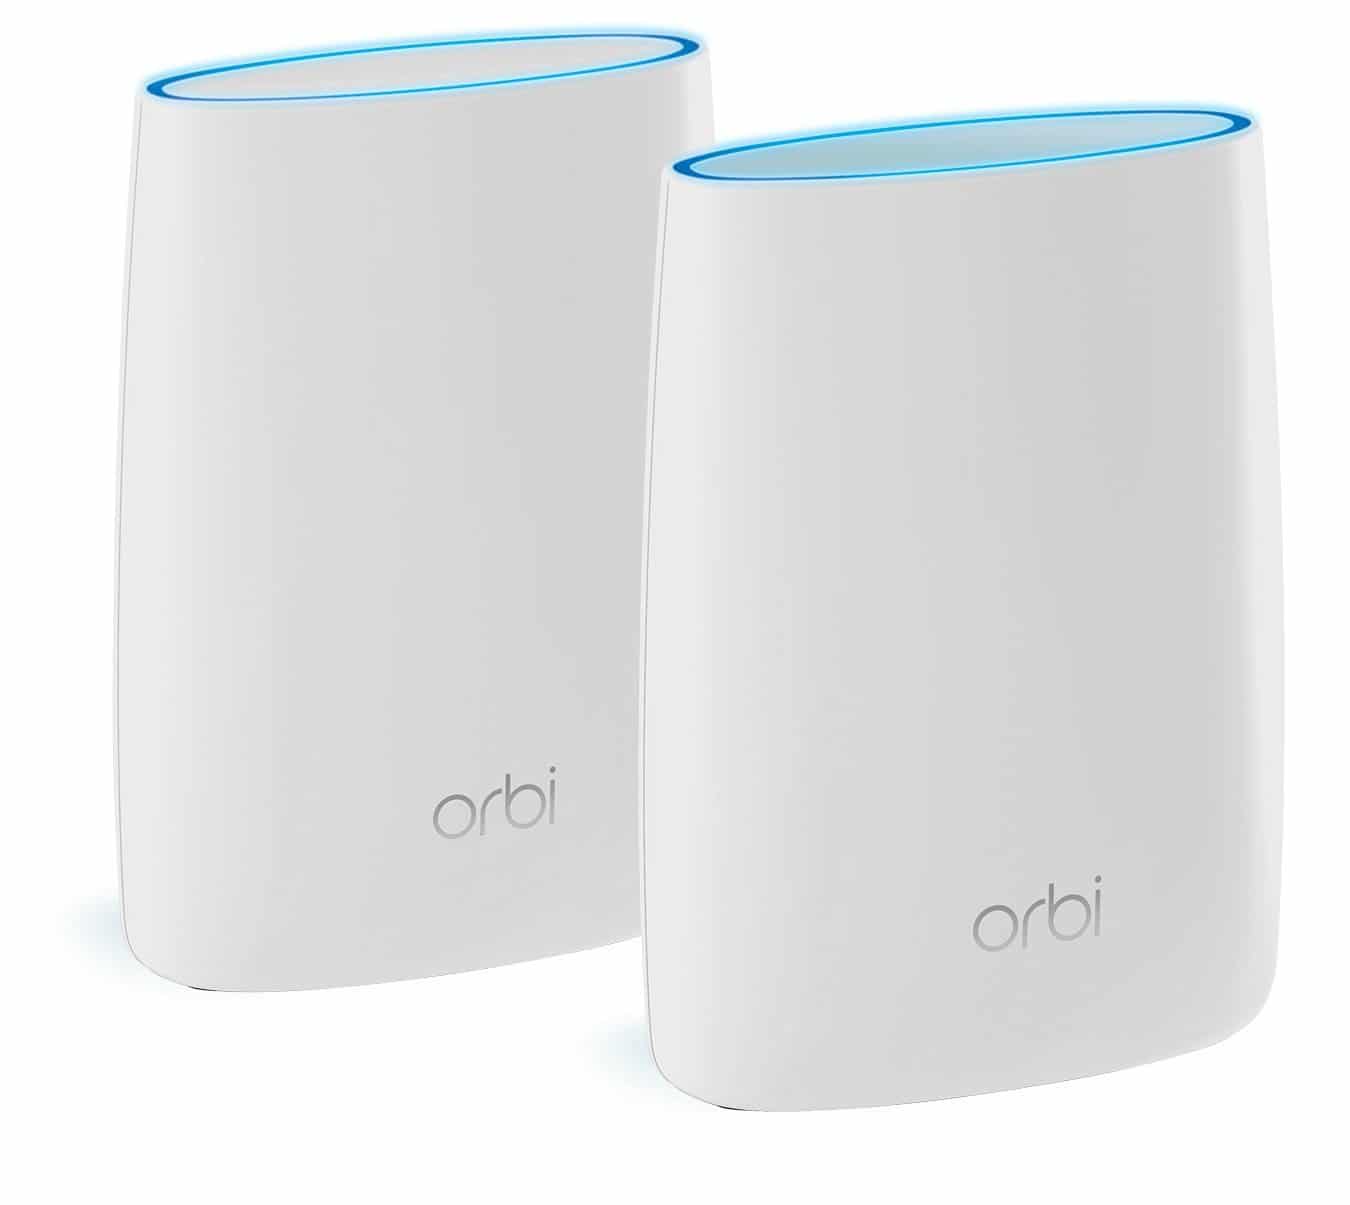 Best Wireless Routers 2017: Orbi Home Wifi 2 Pack